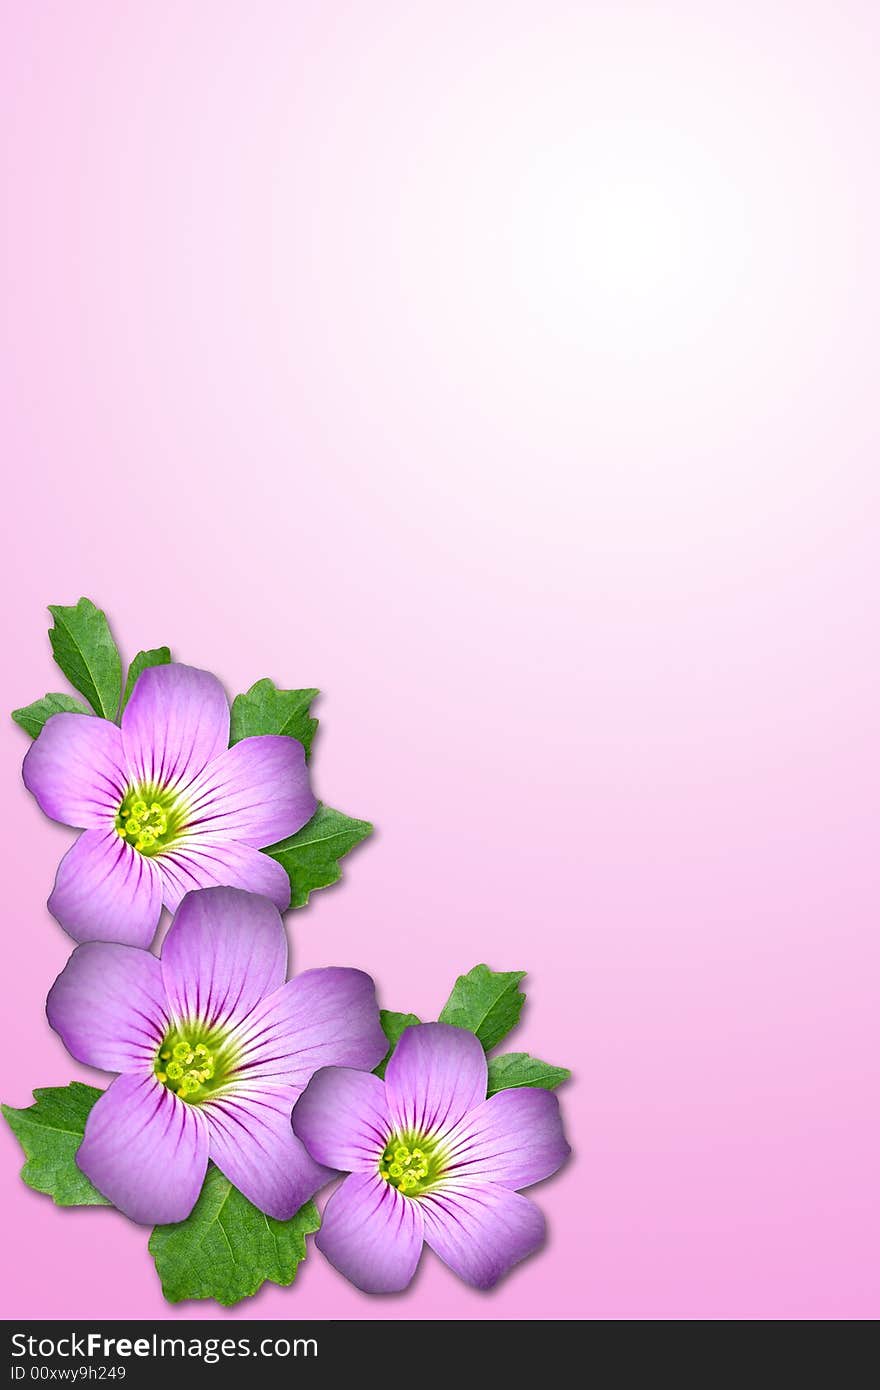 Composite of Purple flower and leaf with pink background